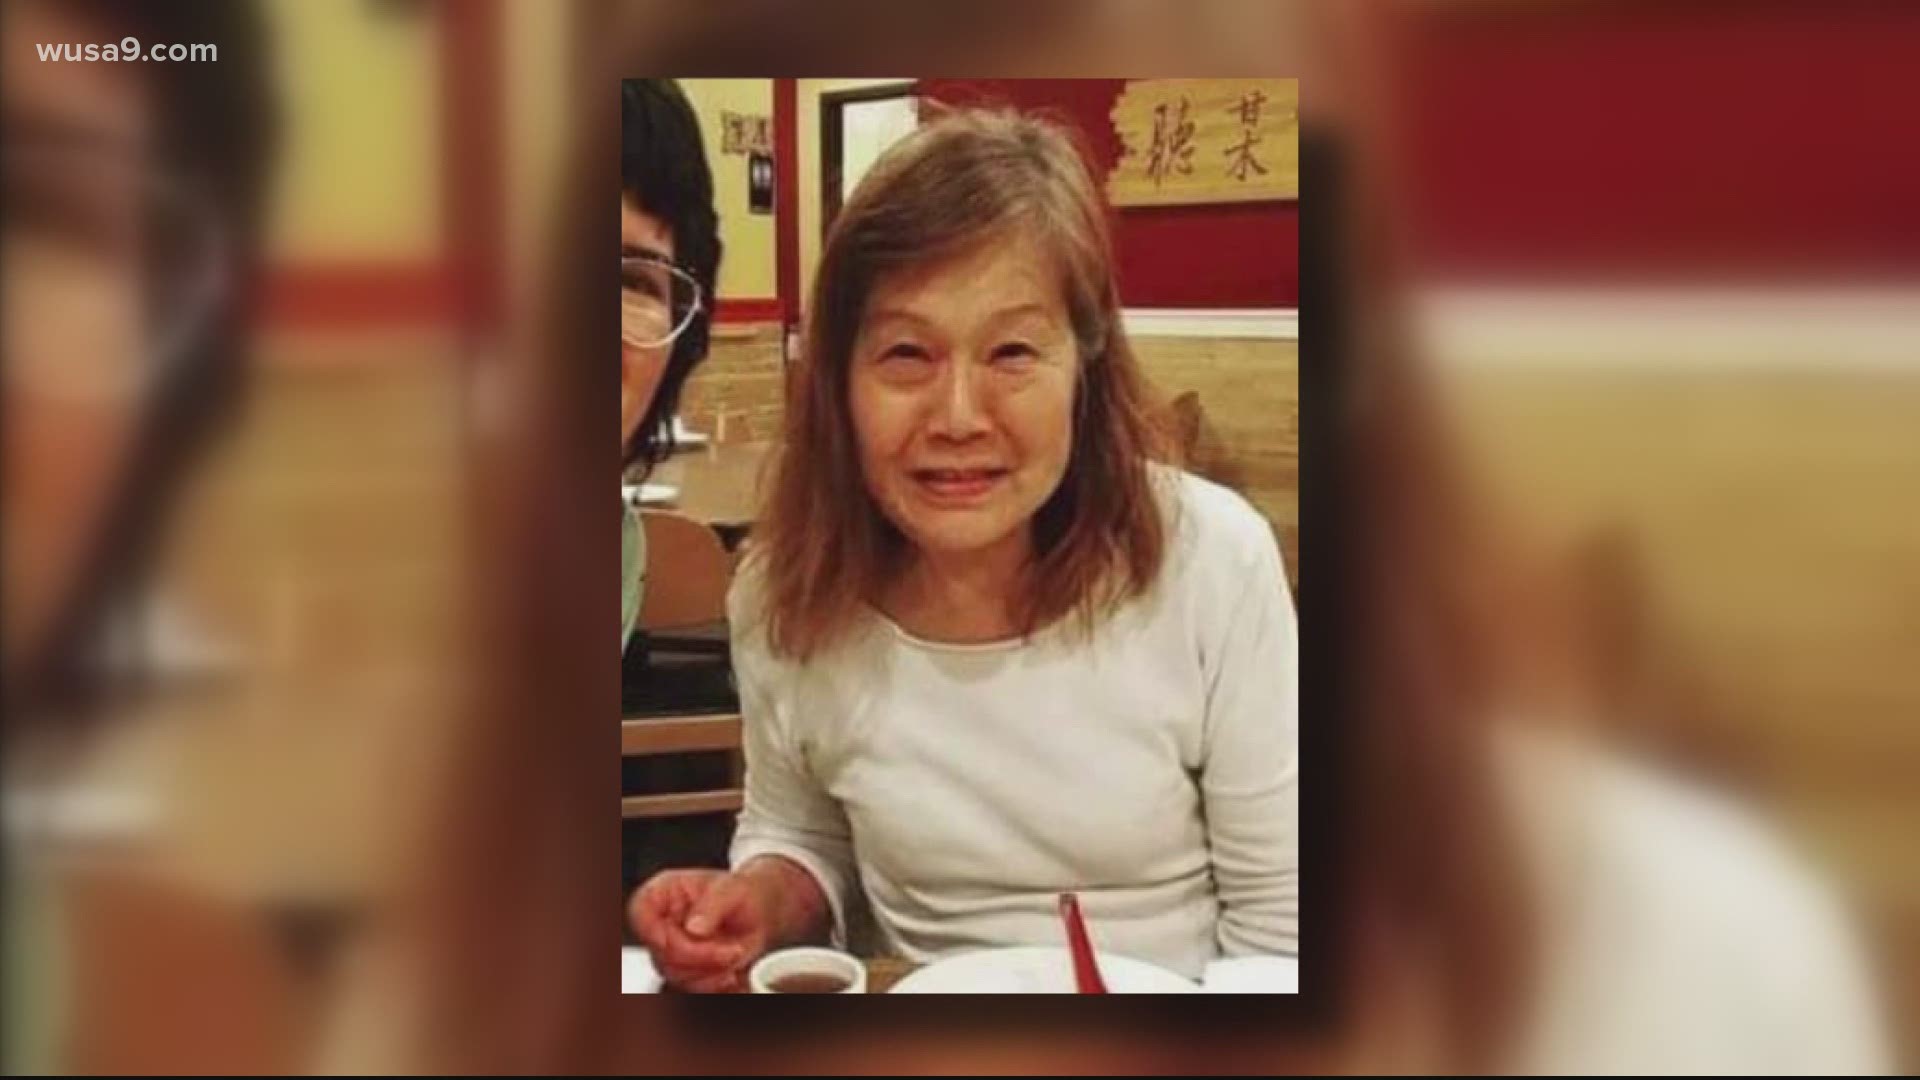 Emily Lu, 72, of Lorton, has not been seen since June 3, according to the Fairfax County Police Department.